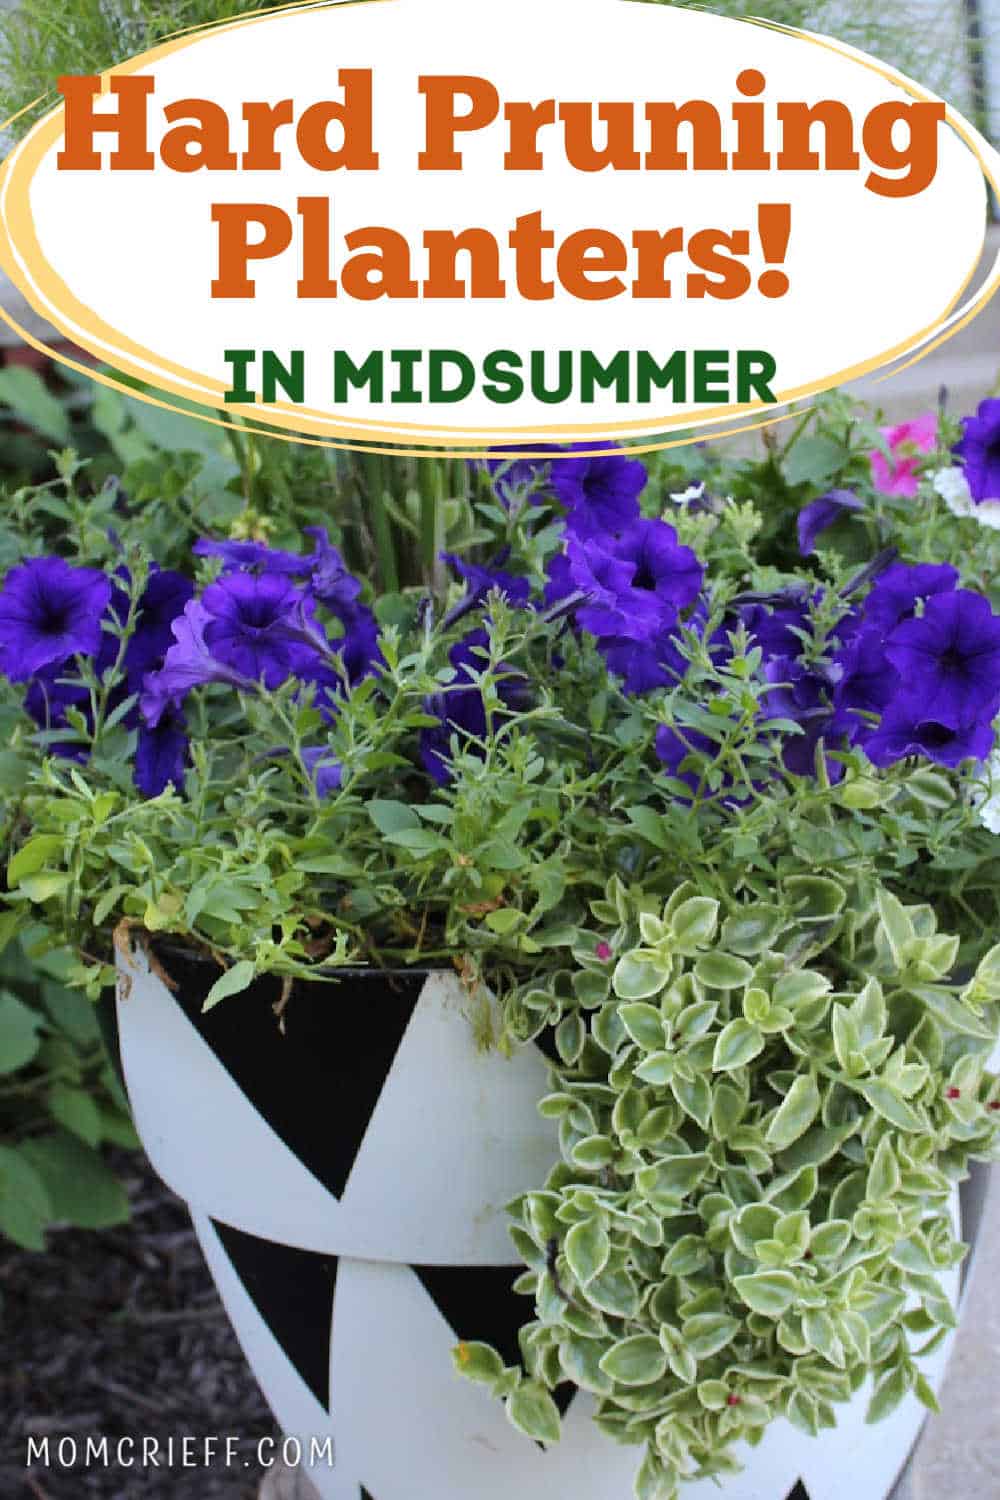 closeup of planter with purple petunias and a text overlay saying Hard pruning planters in midsummer